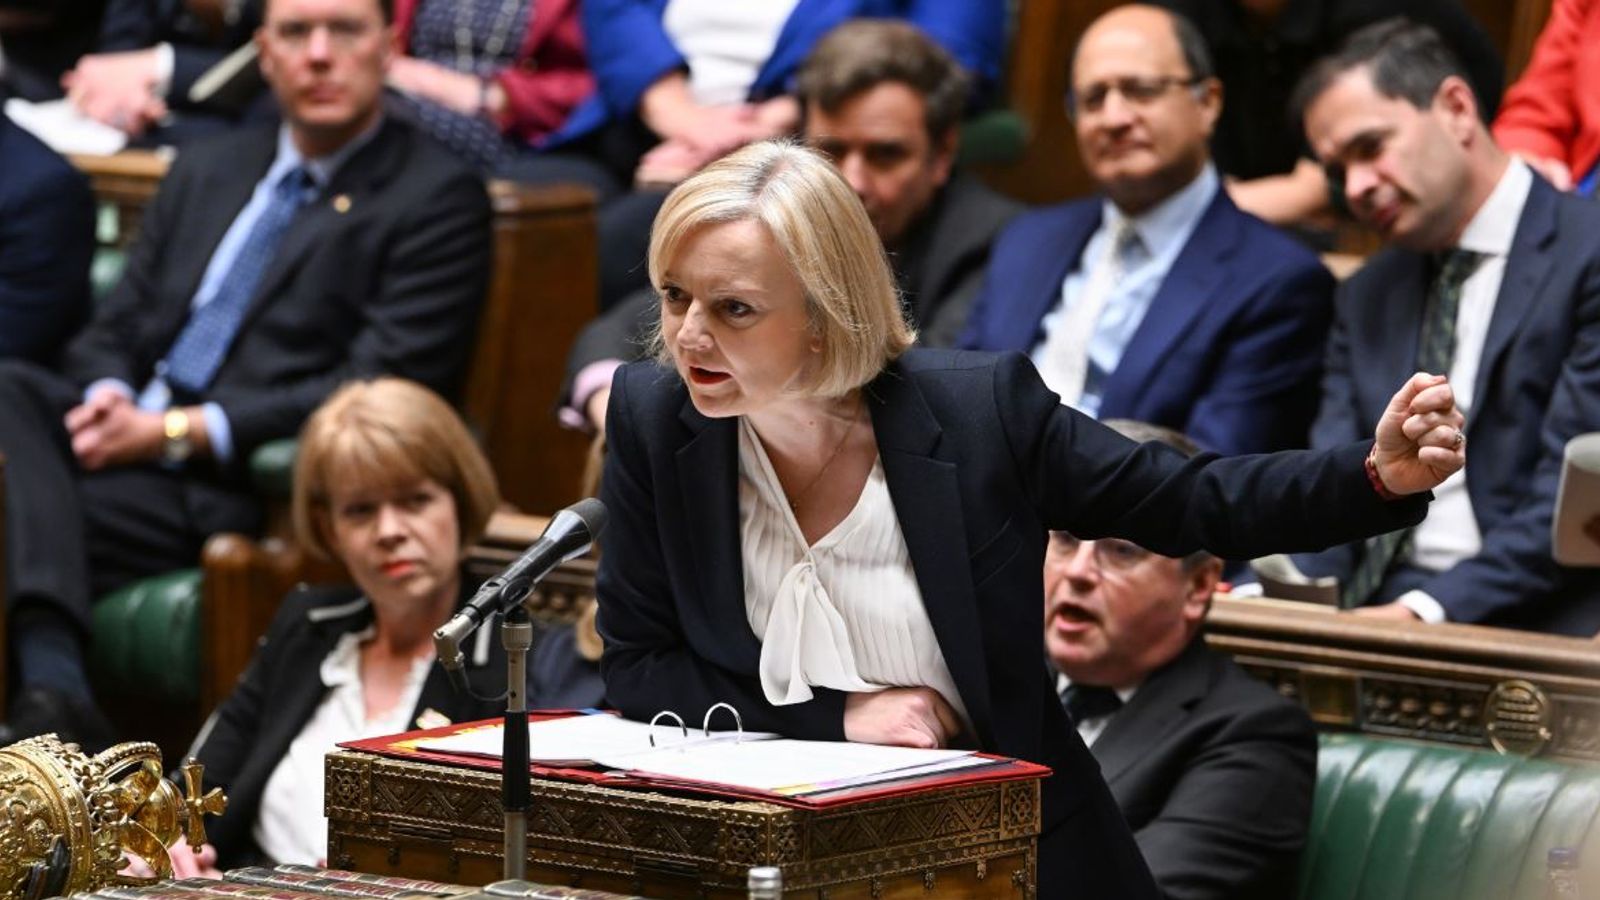 Liz Truss premiership hanging by a thread after bruising day in Westminster